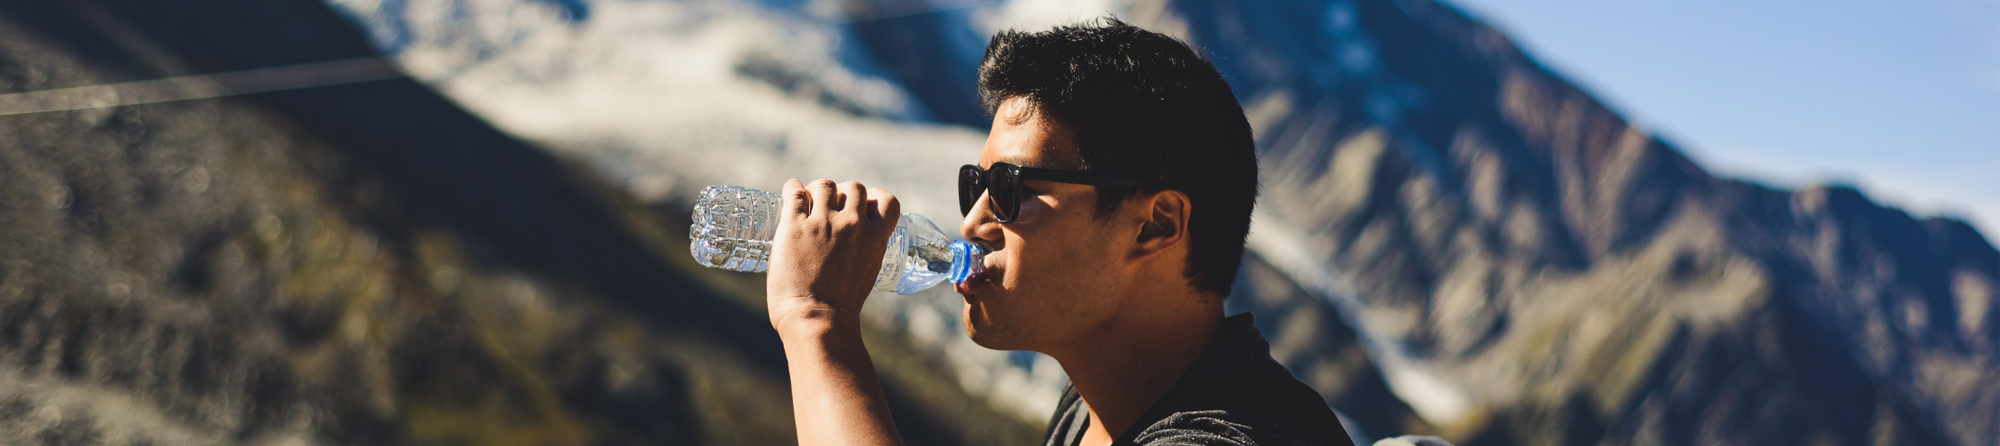 How to Hydrate Before, During and After Exercise